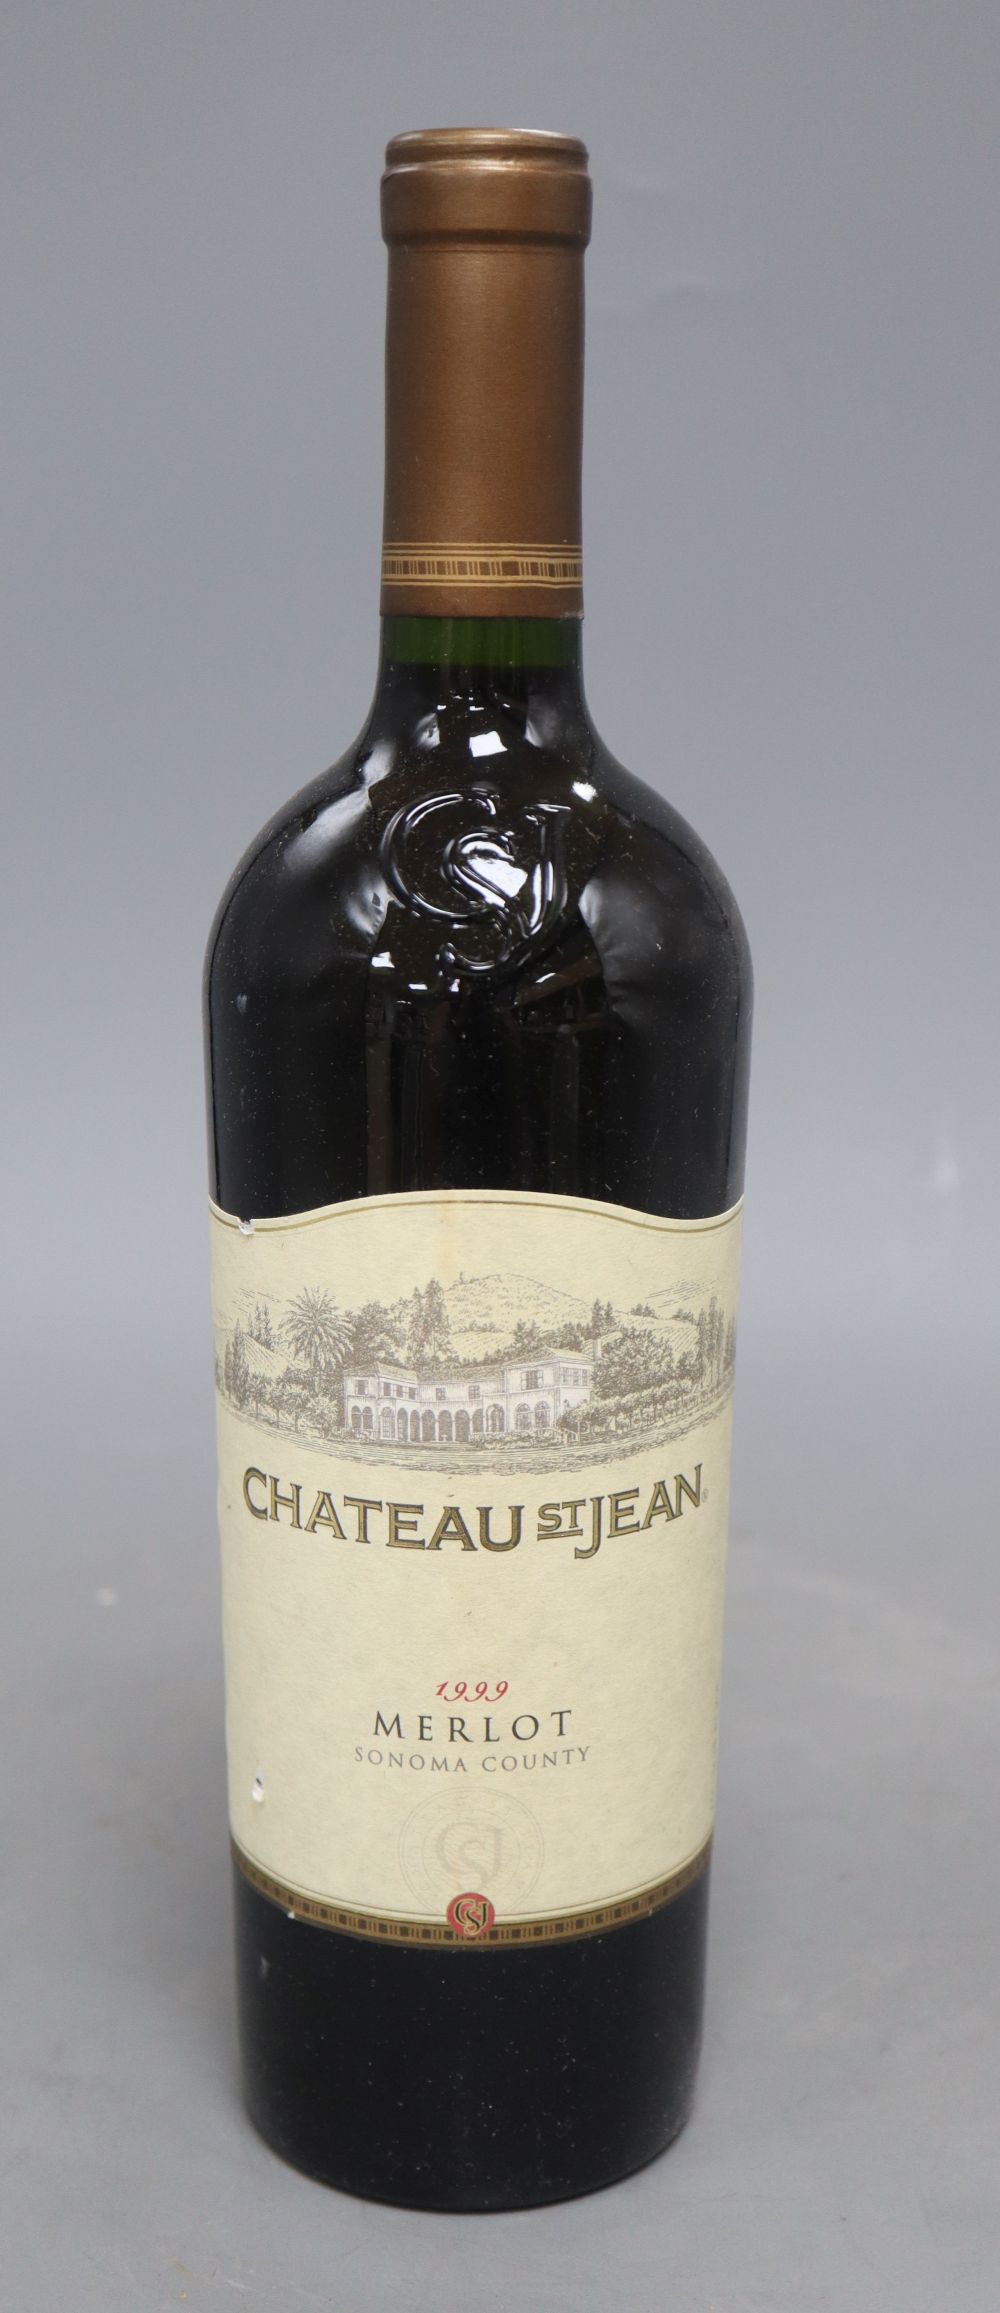 Six bottles of Chateau St Jean Merlot, Sonoma County 1999, United States 1999